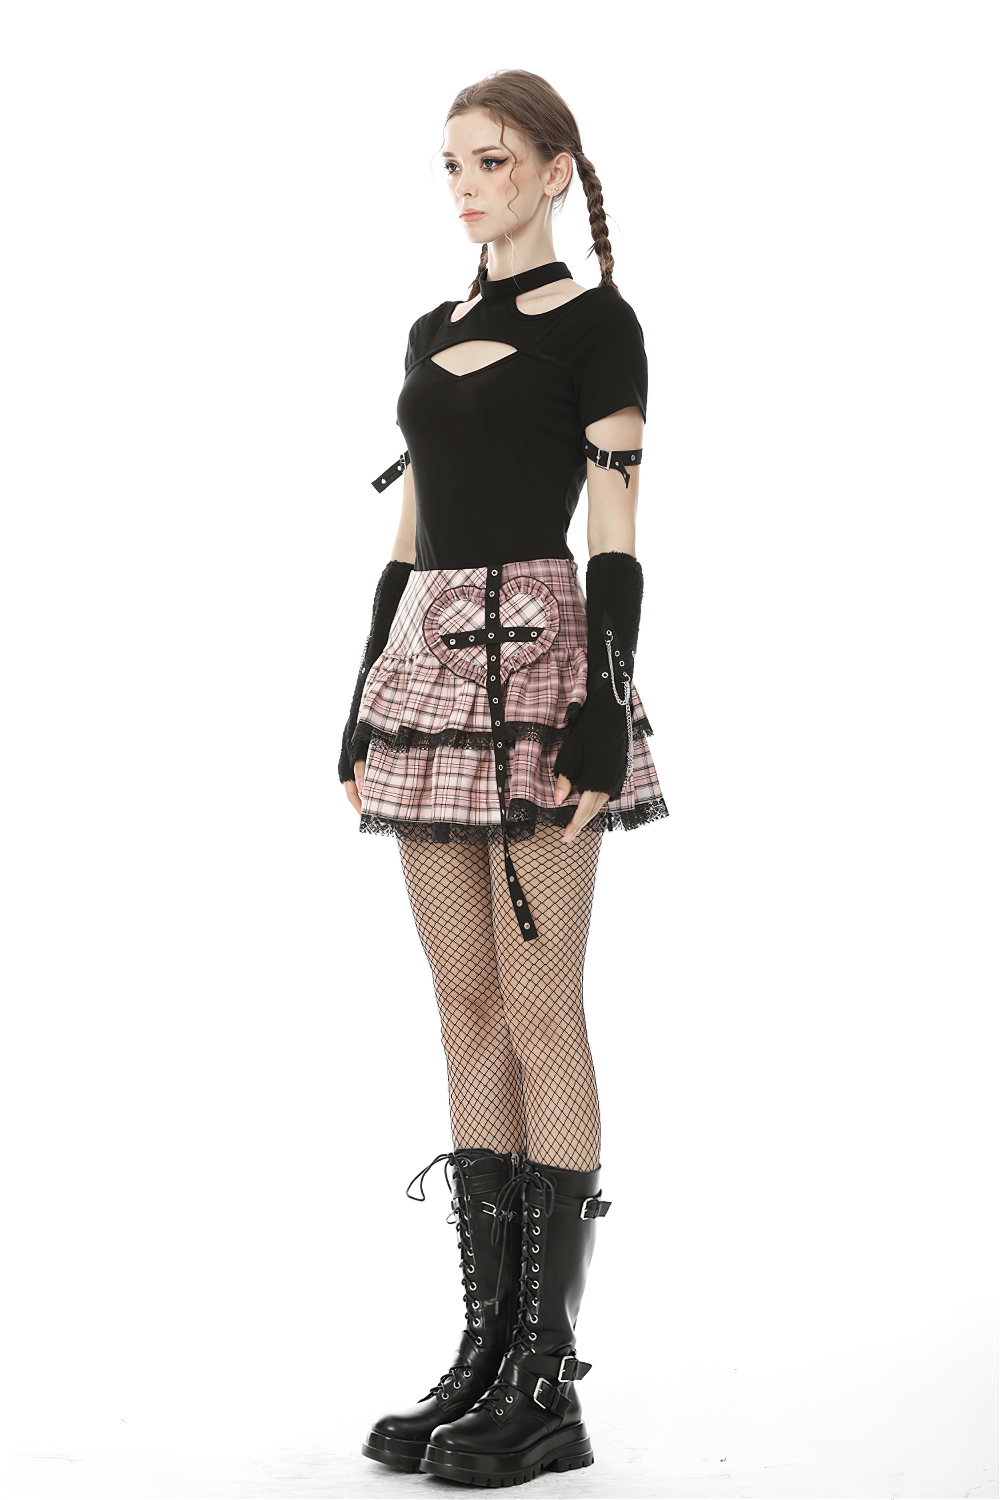 Grunge Female Mini Skirt with Heart Buckle and Grommets